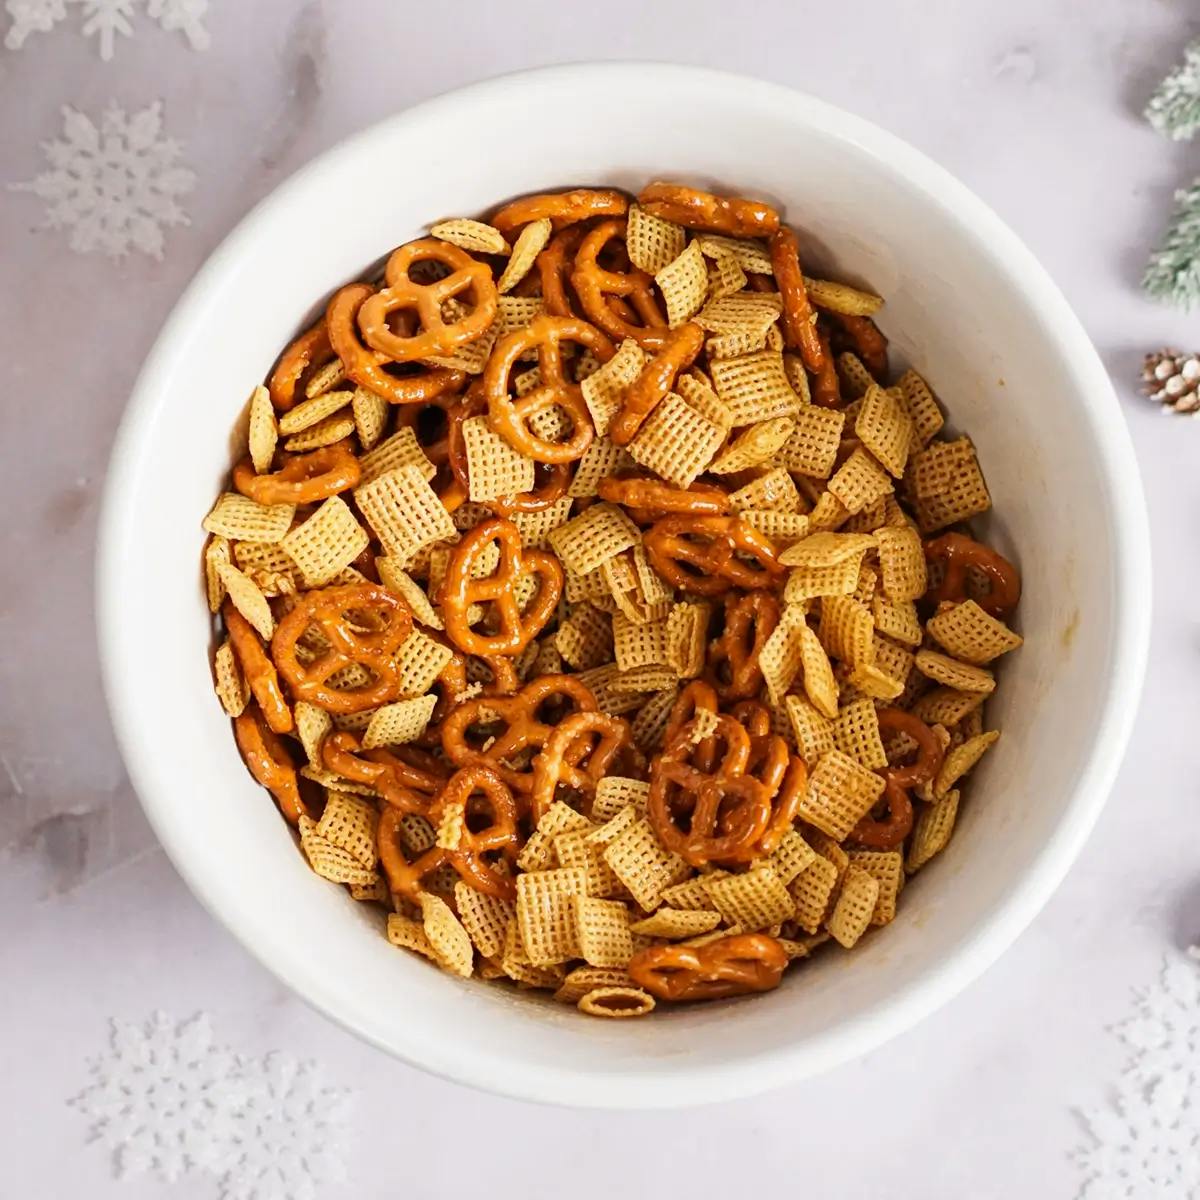 Cereal, pretzels and butter in a bowl being prepared for a Christmas Chex Snack Mix.